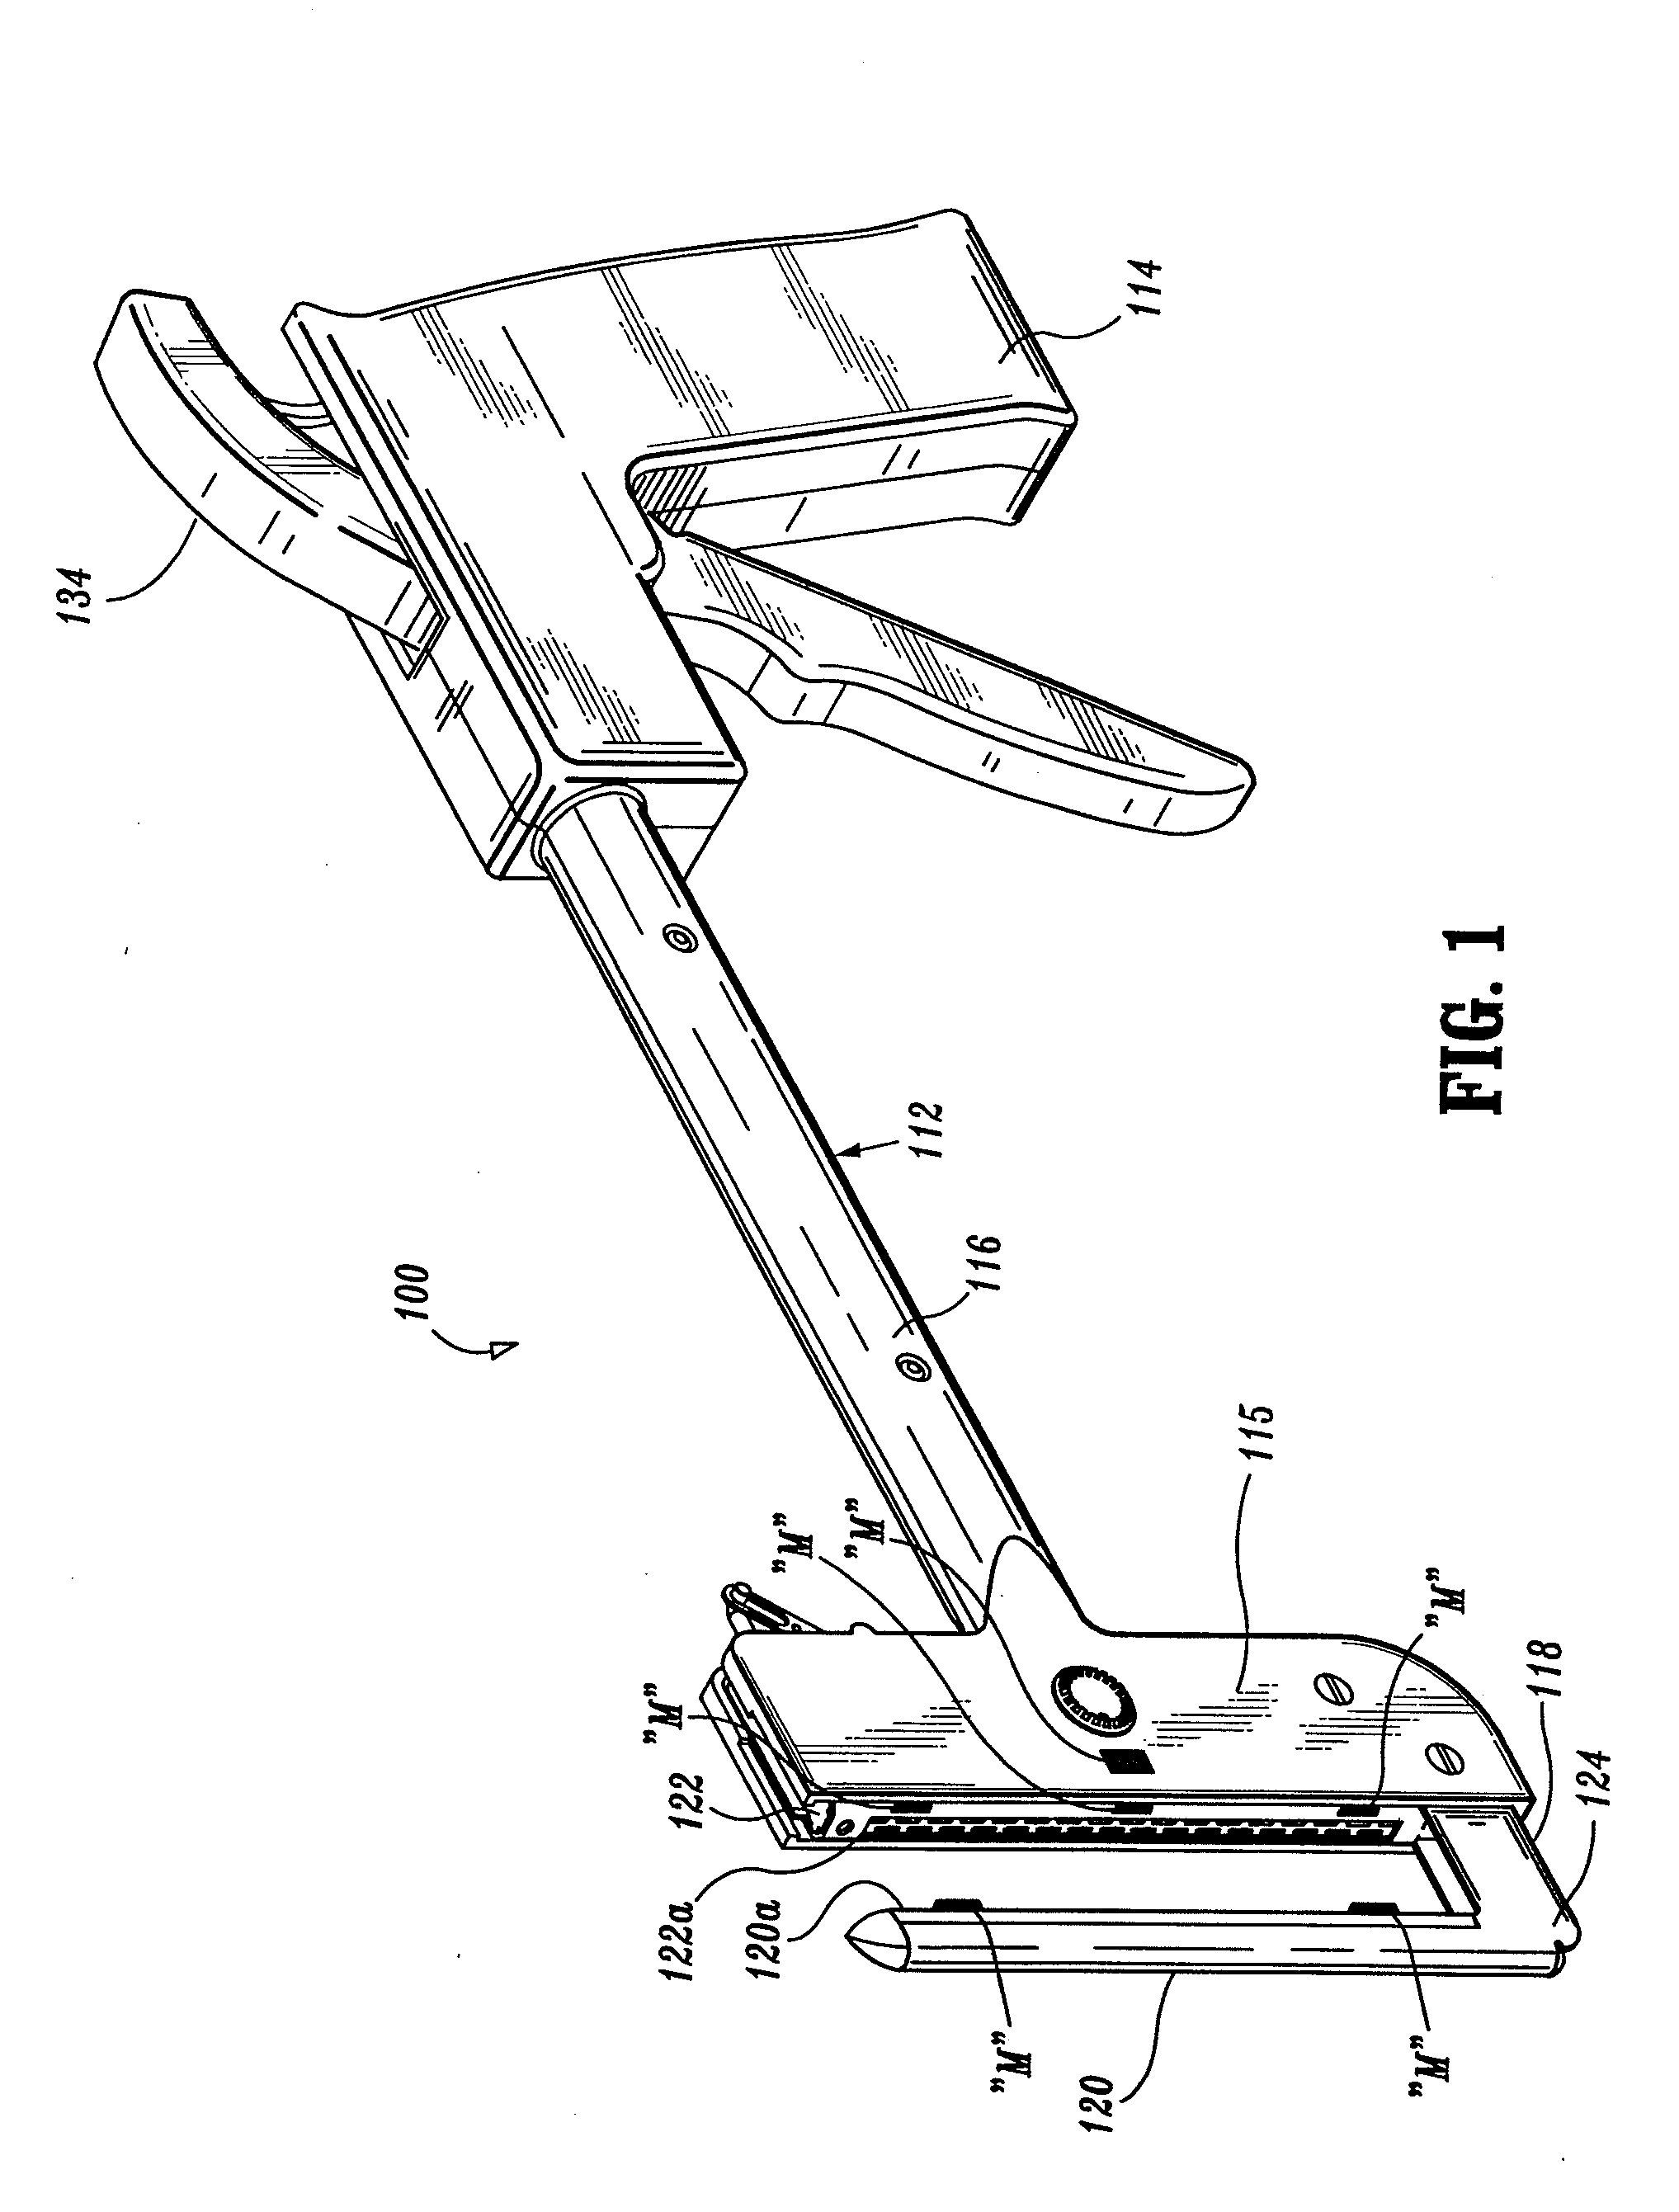 Surgical instruments including MEMS devices